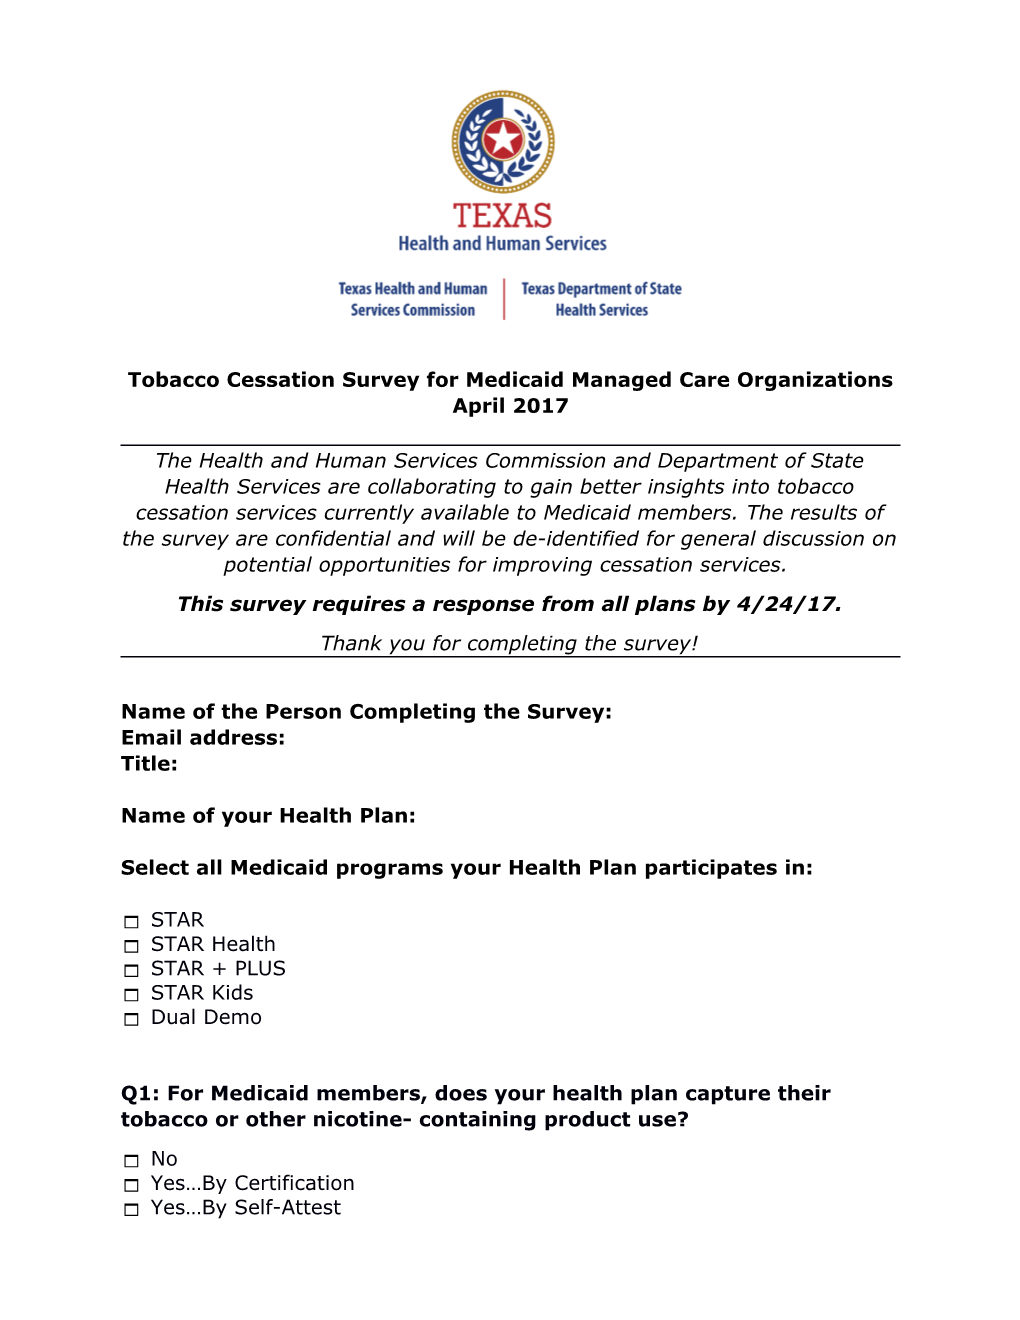 Tobacco Cessation Survey for Medicaid Managed Care Organizations